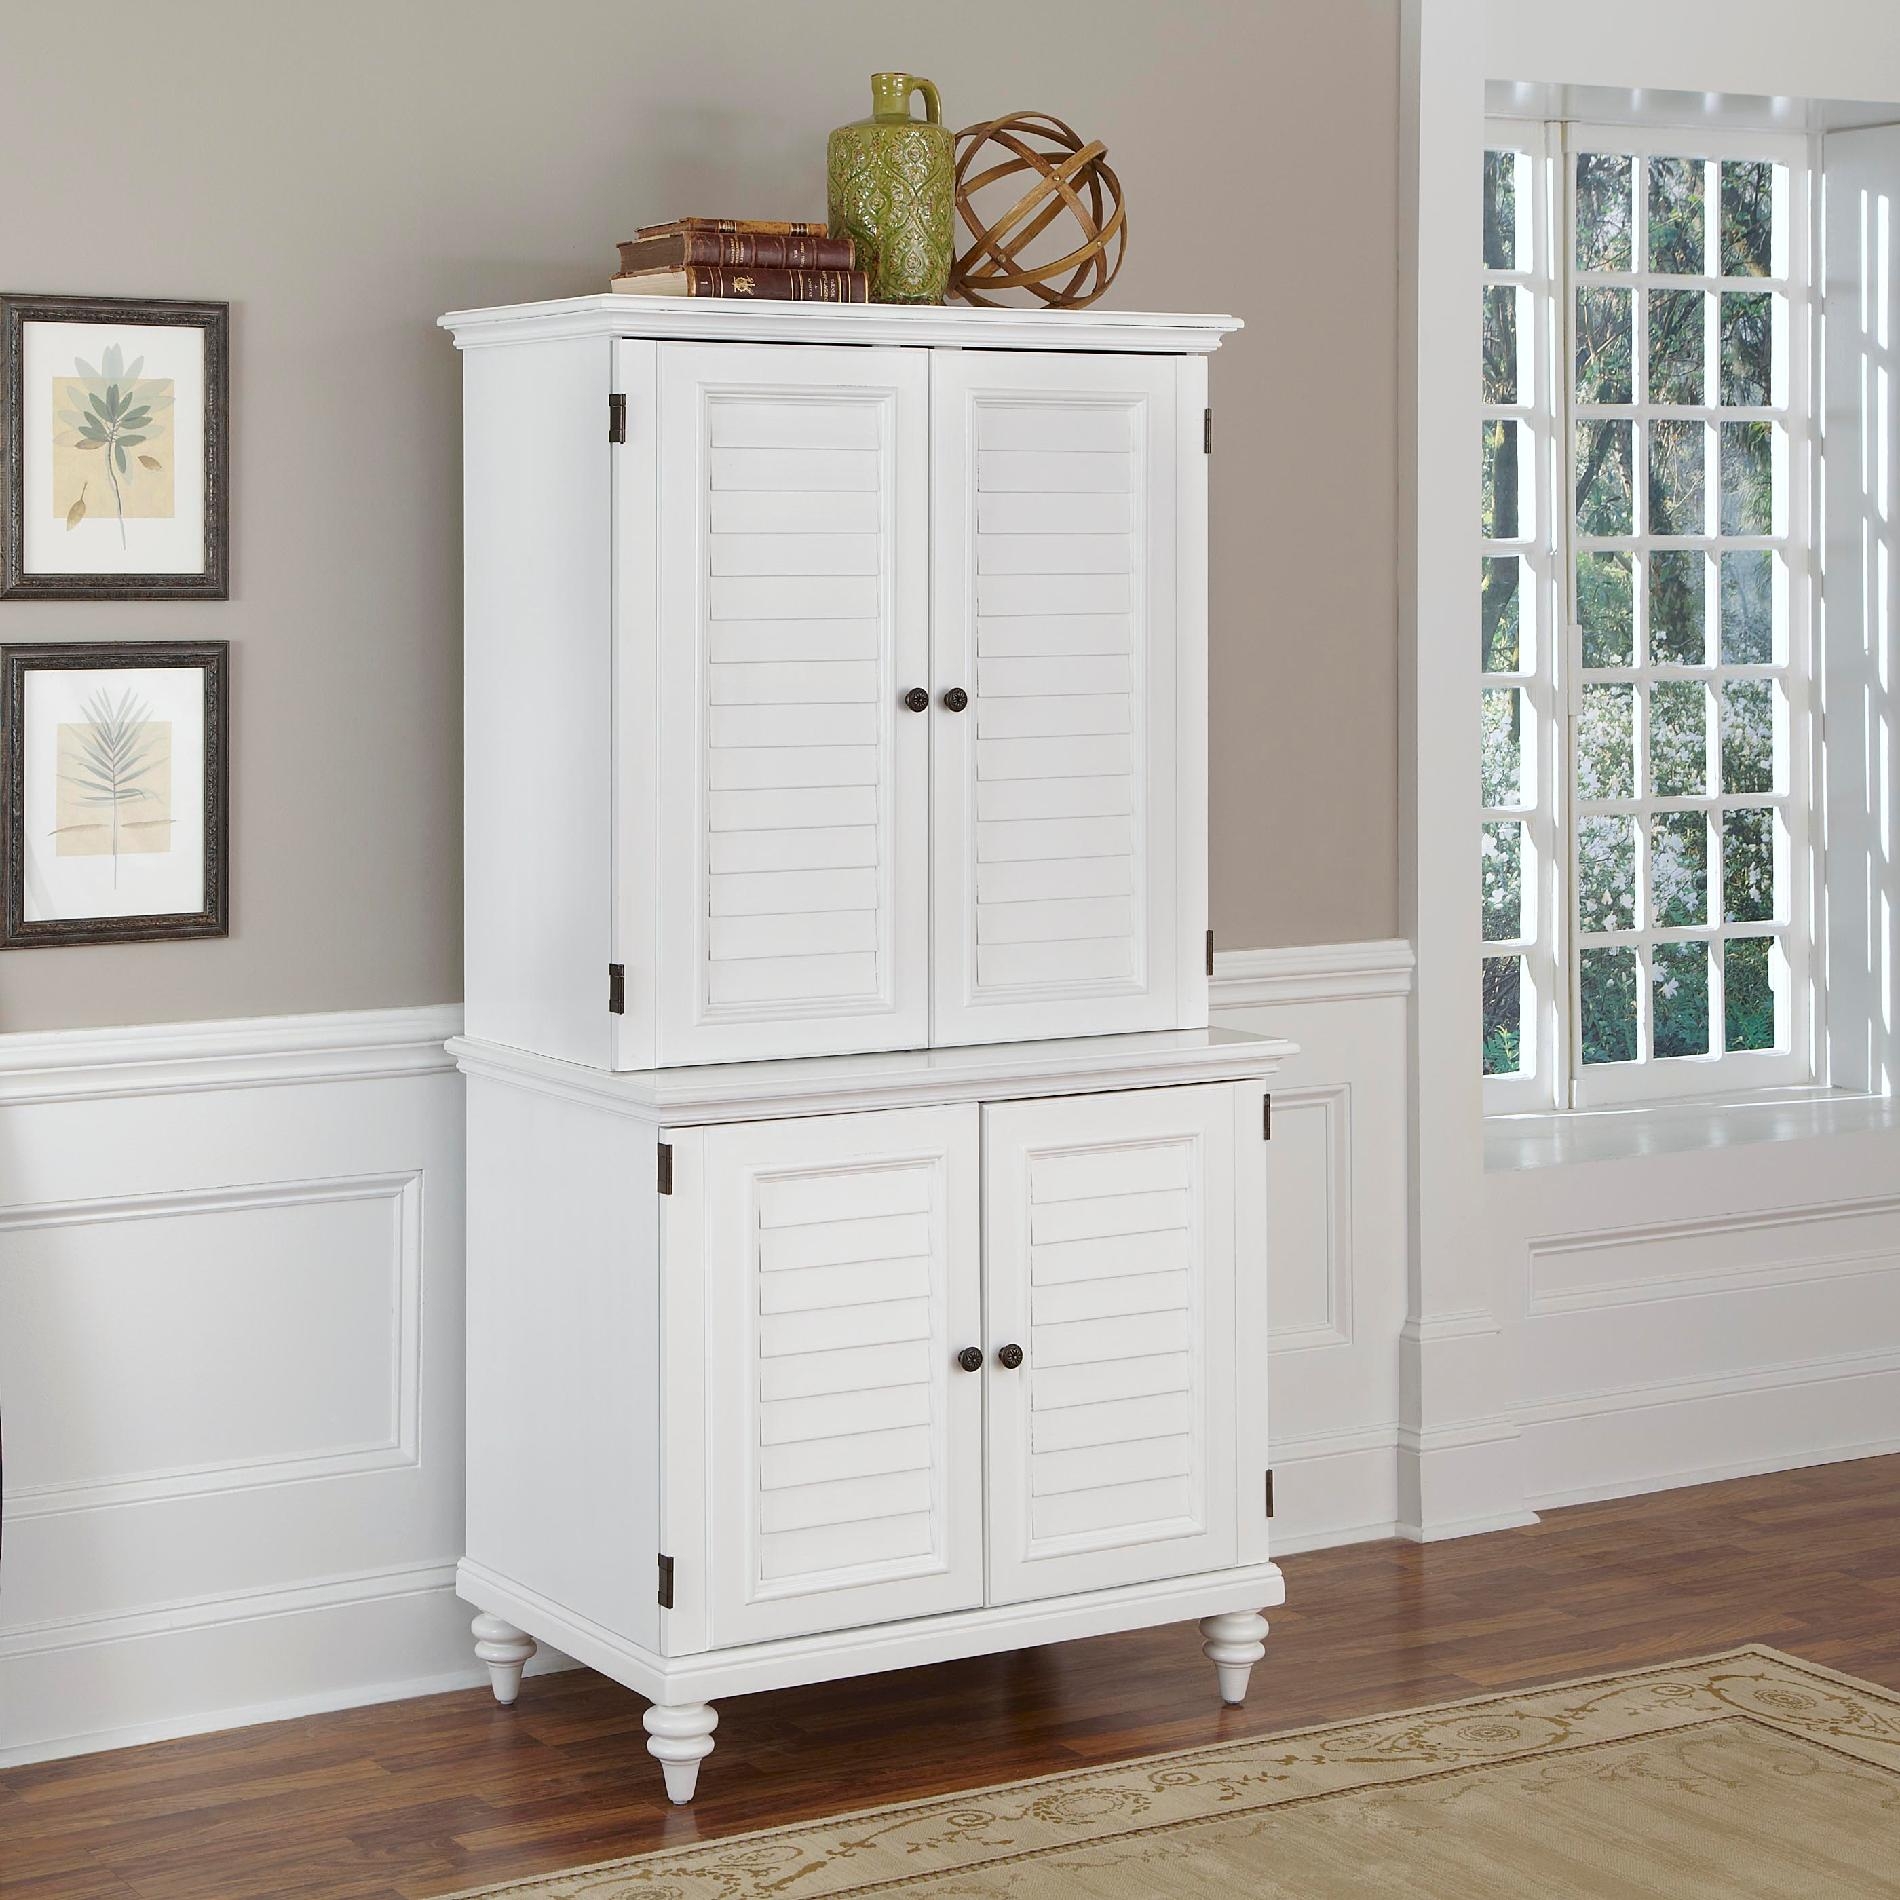 Bermuda Armoire Desk with Compact and Hutch